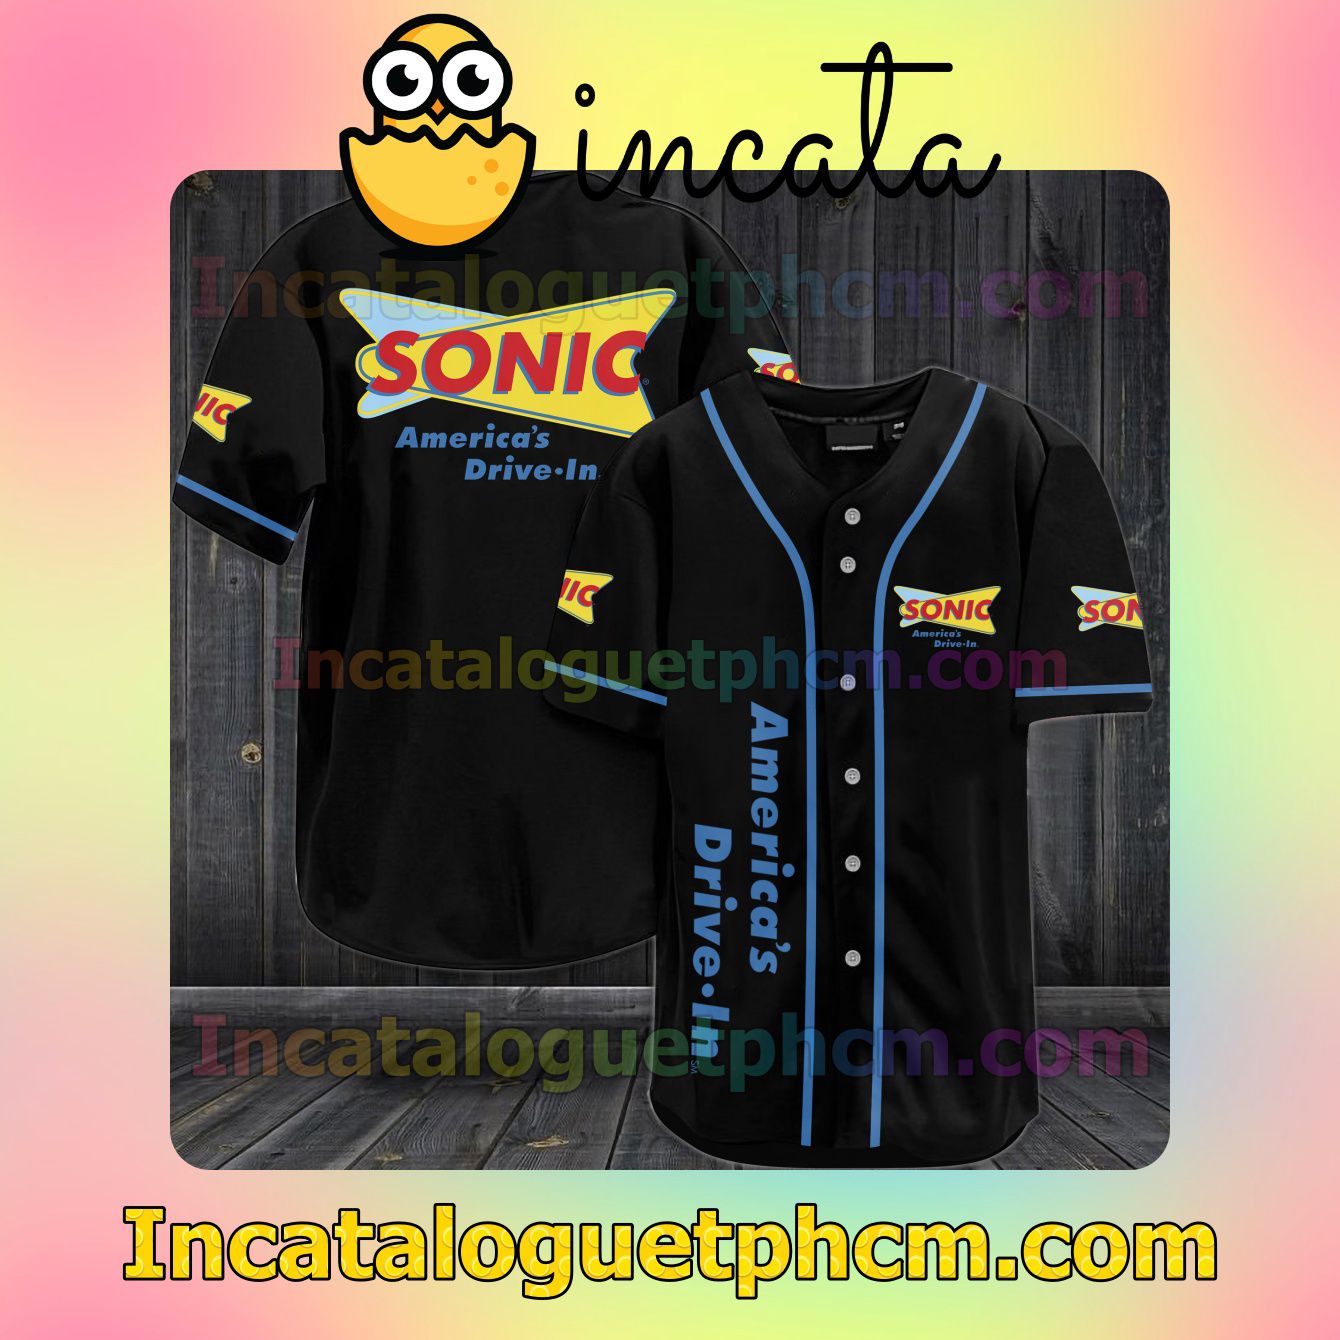 Father's Day Gift Sonic America's Drive-In Baseball Jersey Shirt